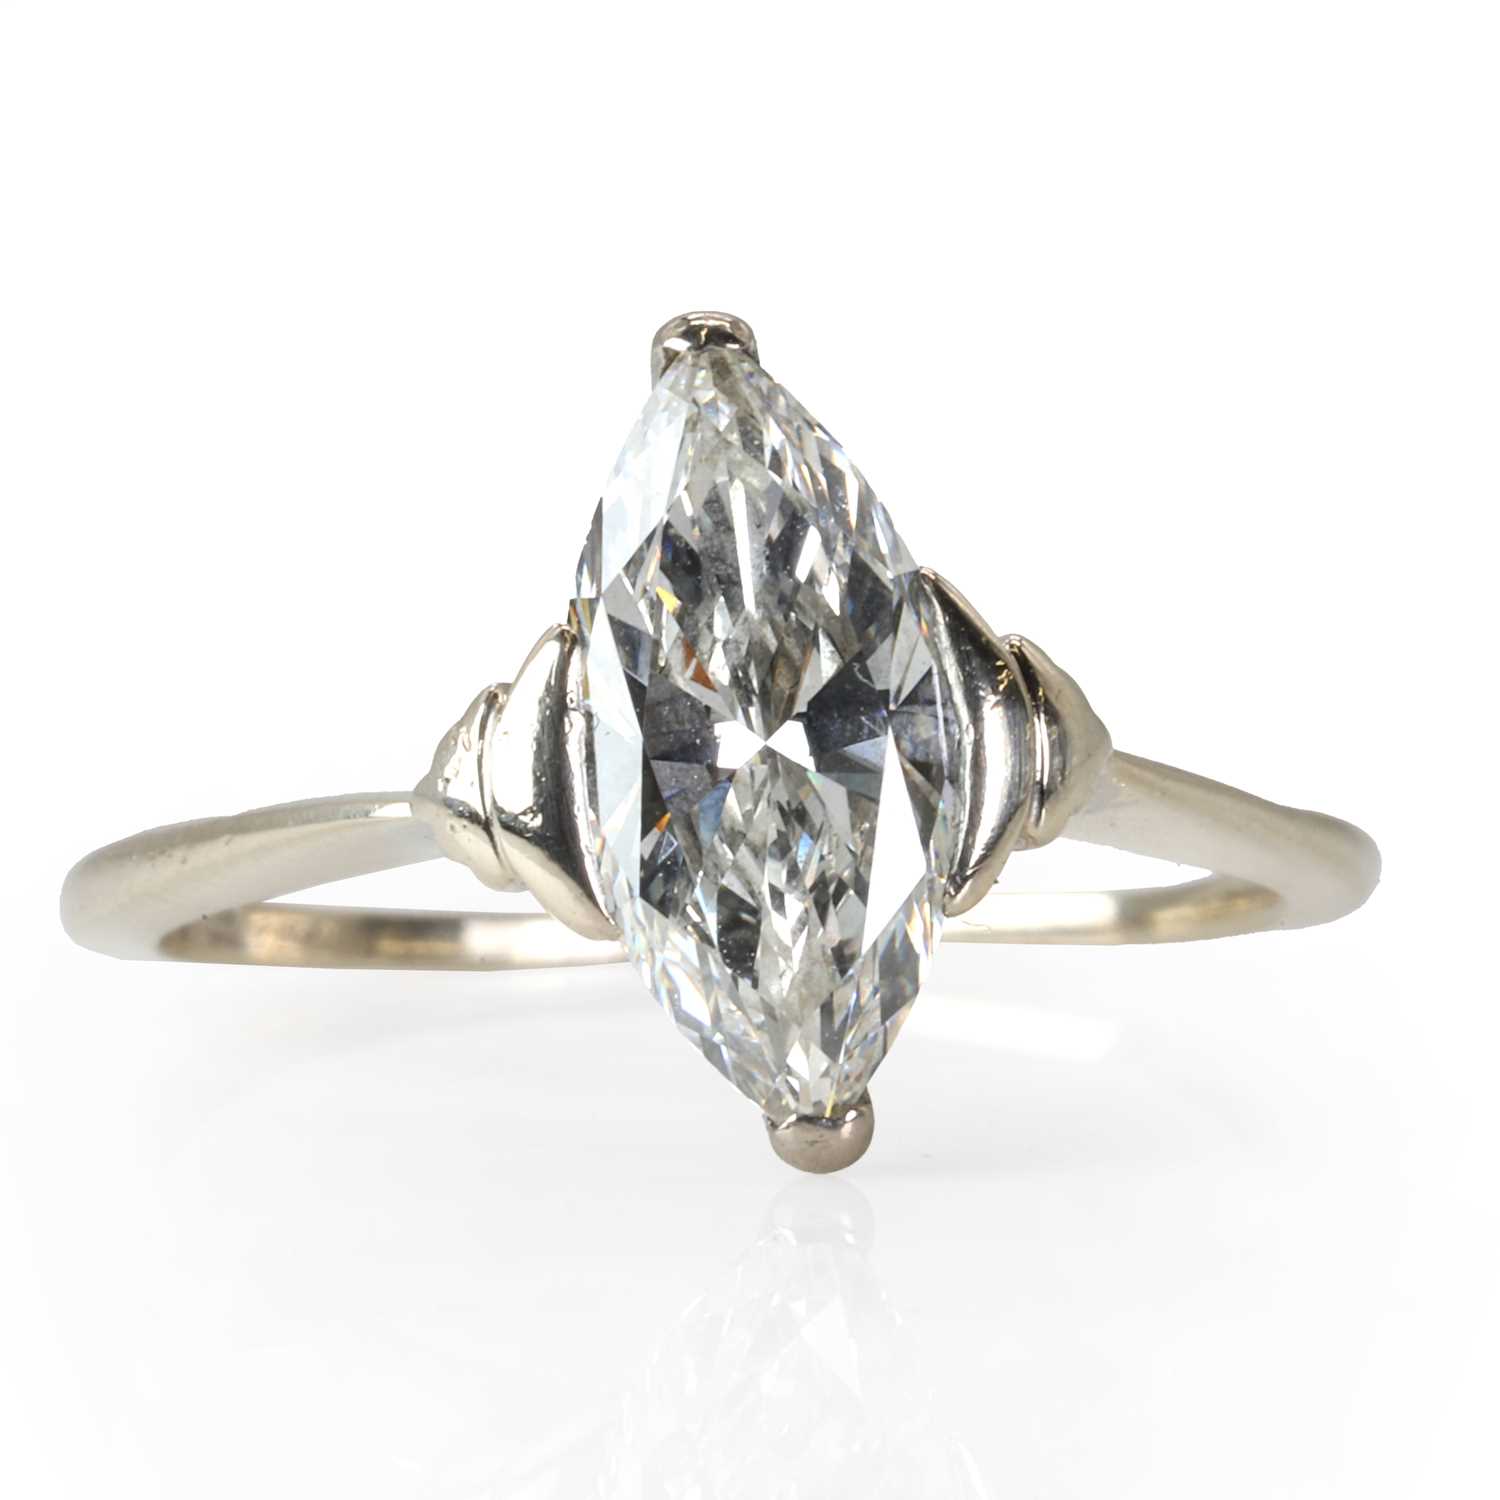 A large marquise cut diamond solitaire ring,